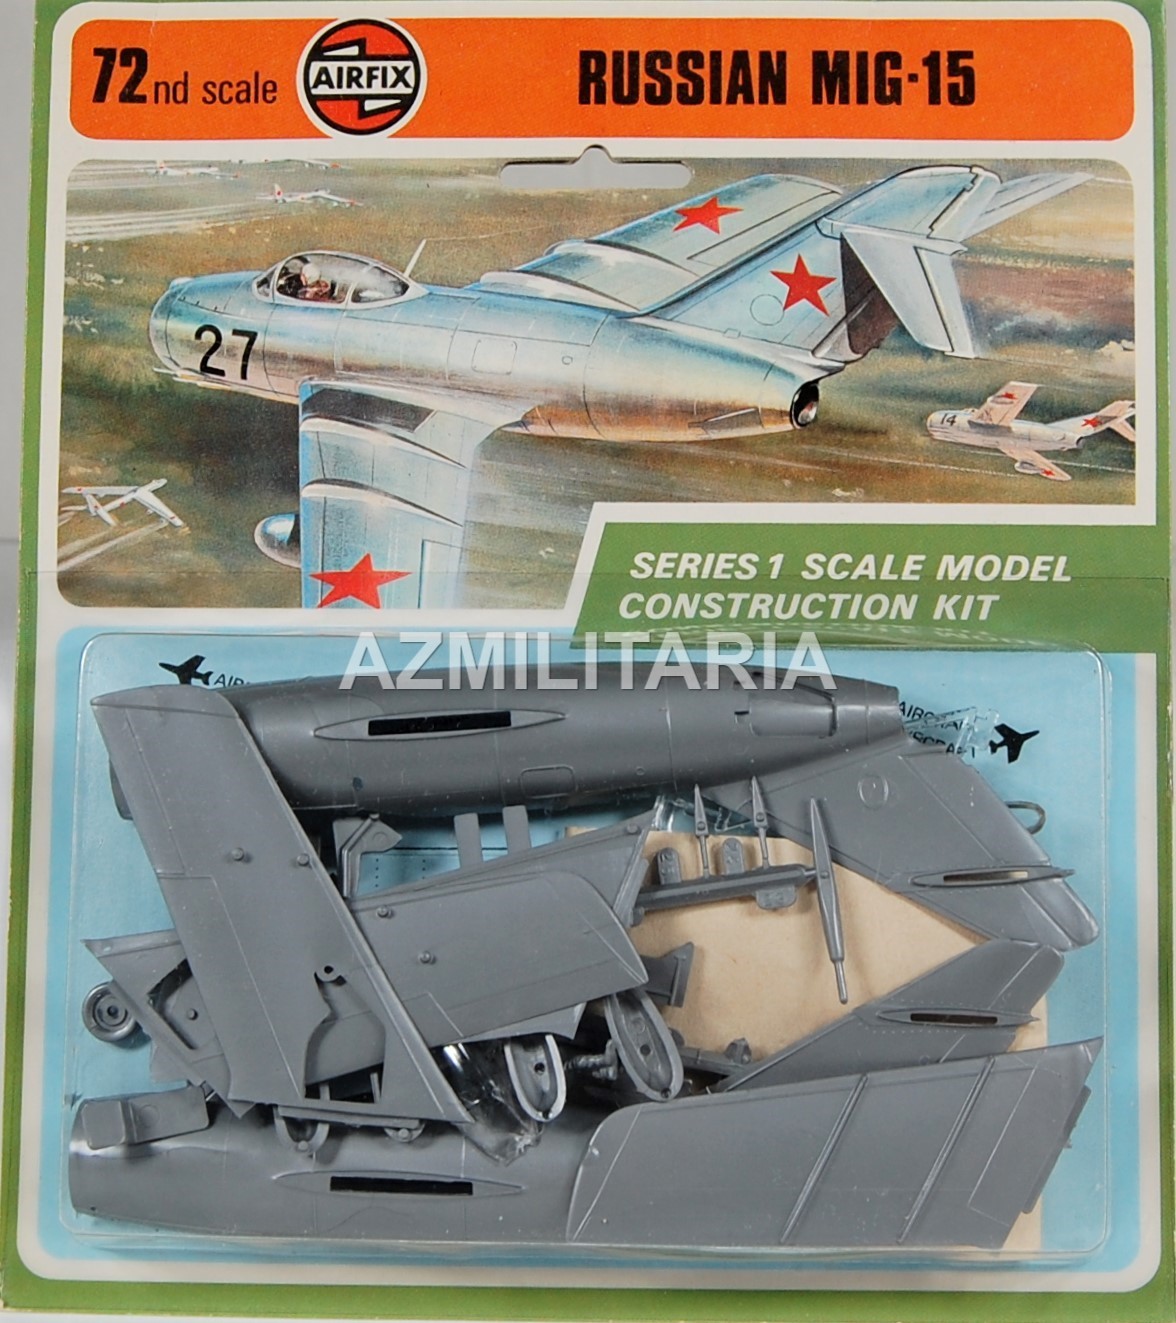 Primary image for Airfix 72nd Scale Russian MIG-15 Series 1 CODE No. 01017-1 